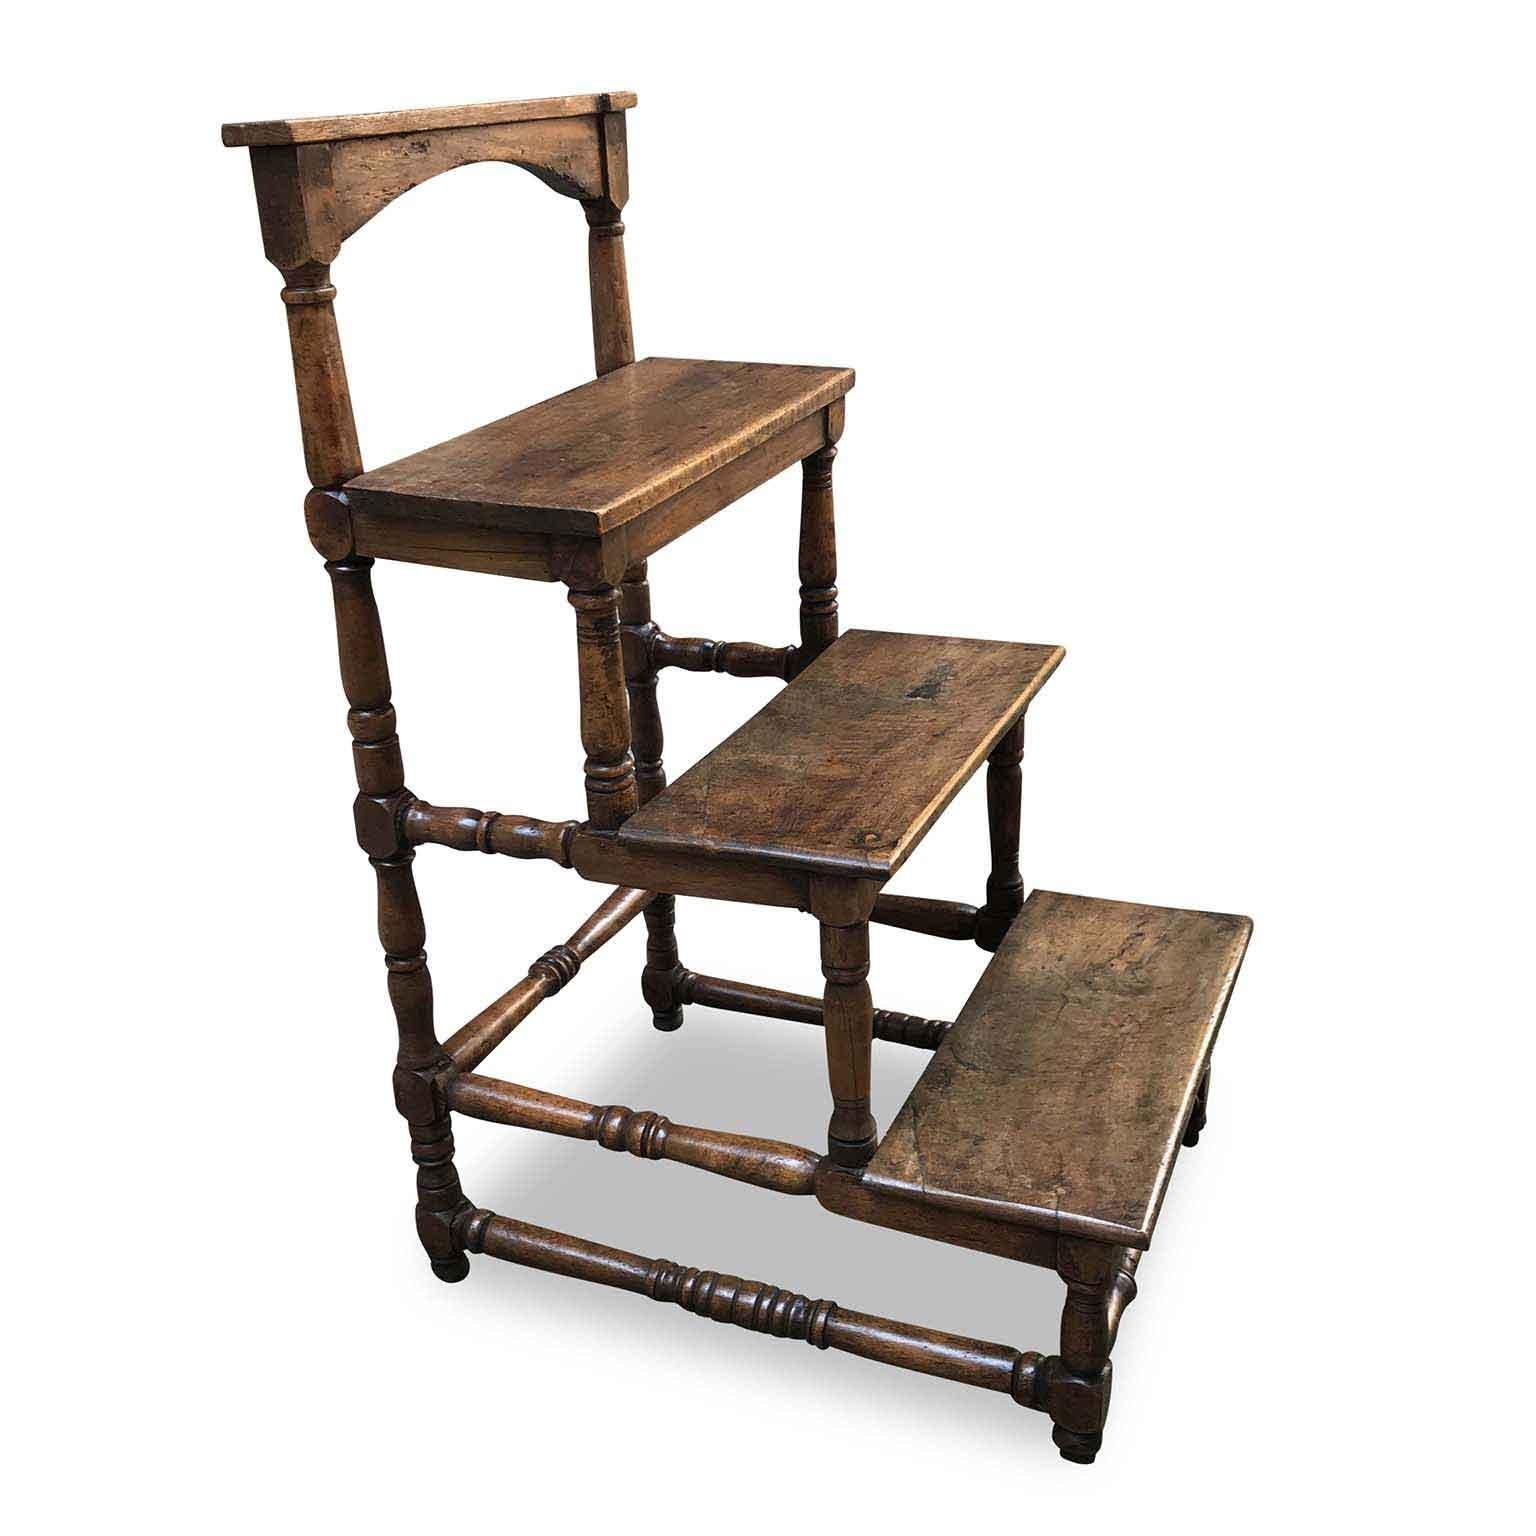 This rare four small stairs have decorative solid walnut turned structure in the Italian Baroque Rocchetto style. The 17th century Italian walnut piece comes from Tuscany, Florence and shows old restorations and a first small step made in oak,